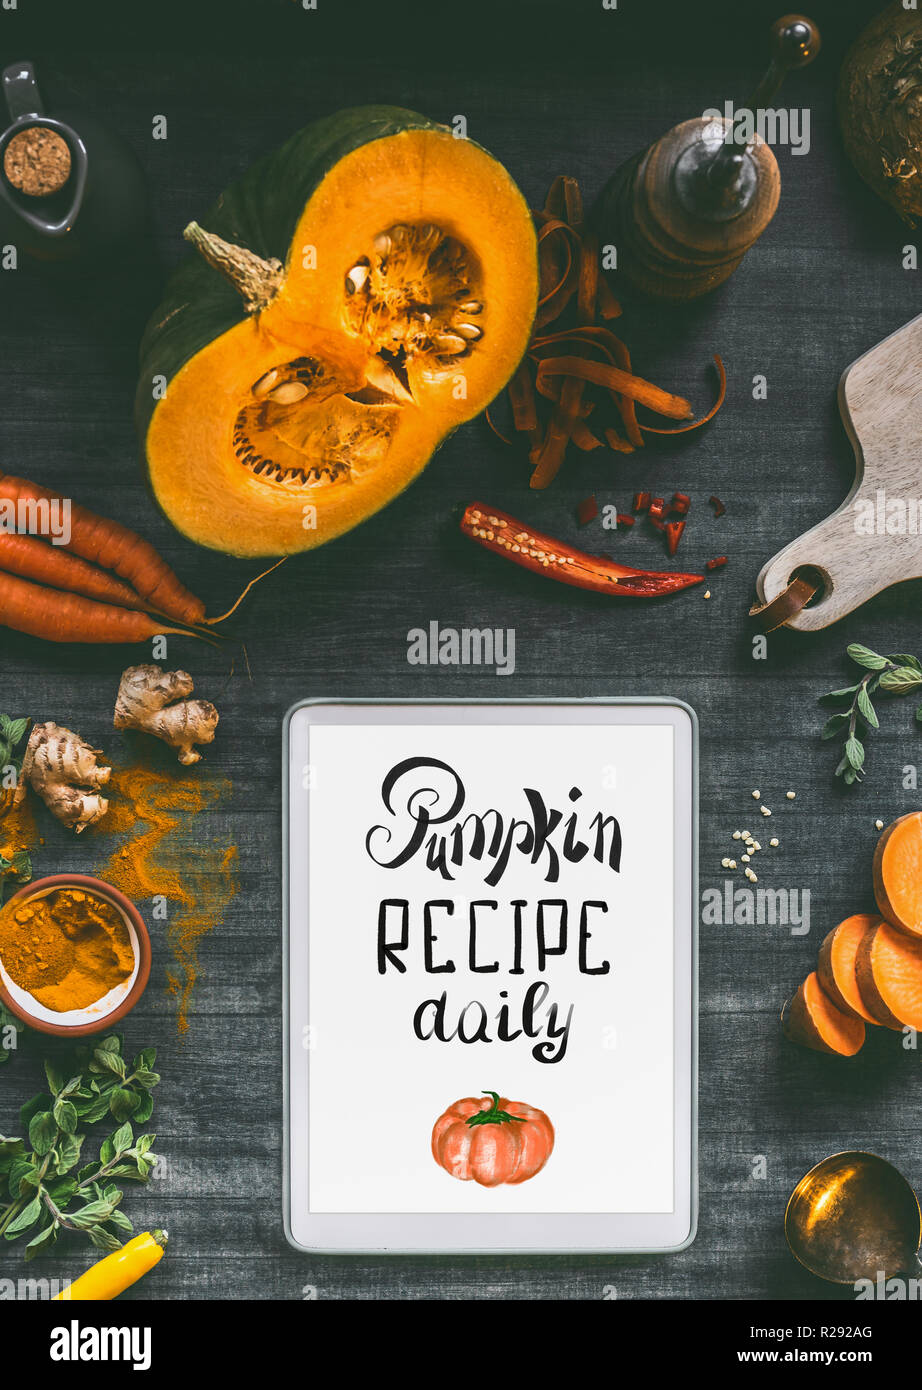 Tablet pc with text lettering: Pumpkin recipe daily. Orange cooking ingredients: sweet potato, carrots, turmeric powder,chili and ginger for tasty cui Stock Photo